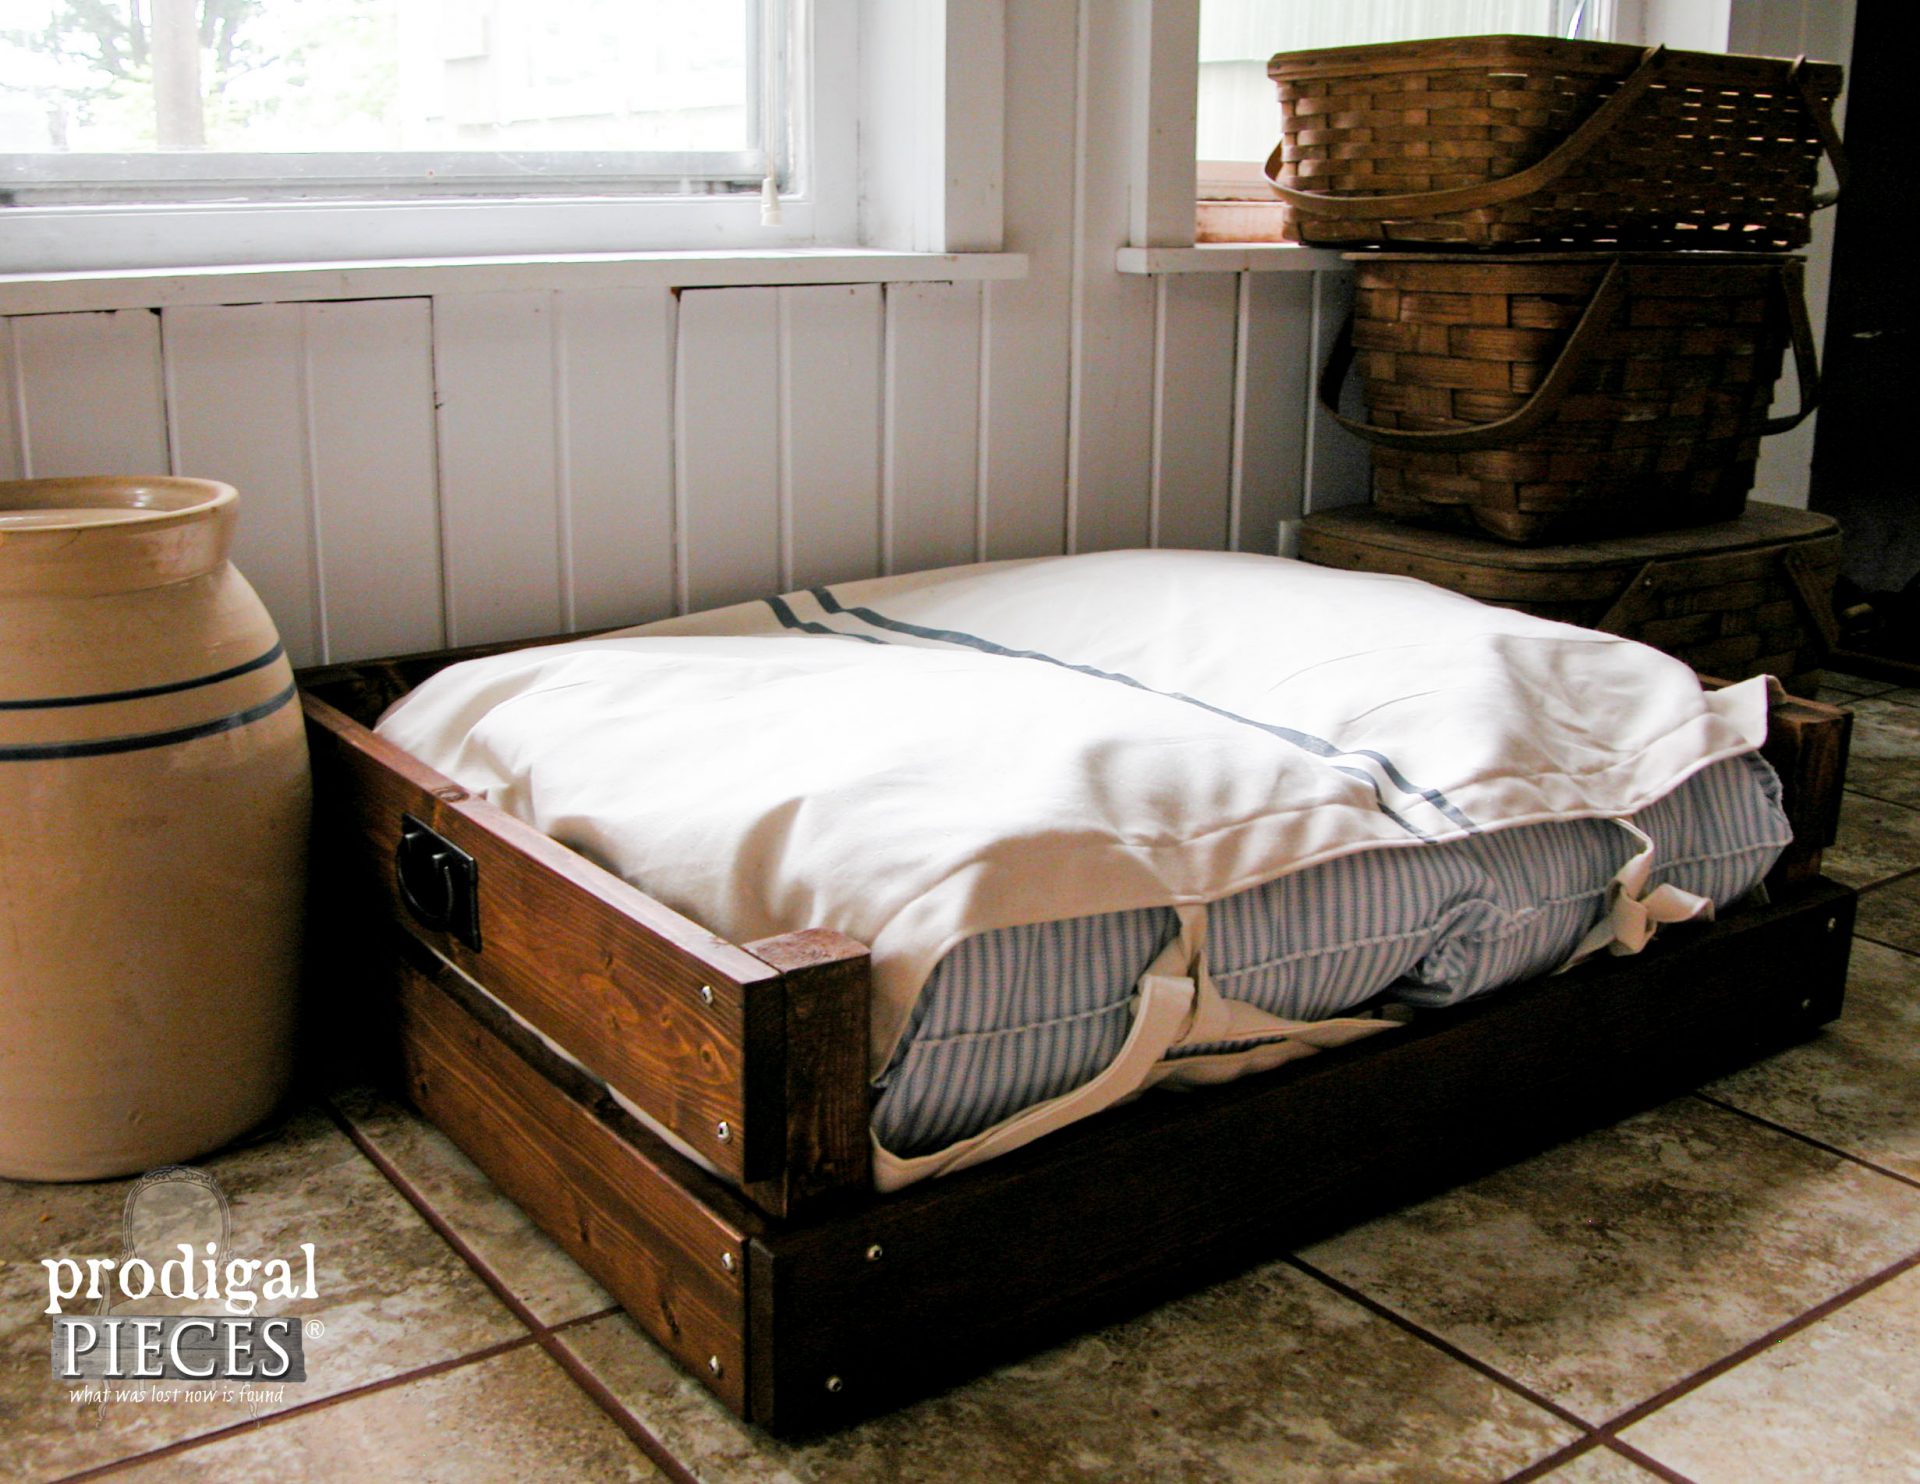 Rustic DIY Pet Bed for Dogs and Cats by Larissa of Prodigal Pieces | prodigalpieces.com #prodigalpieces #pets